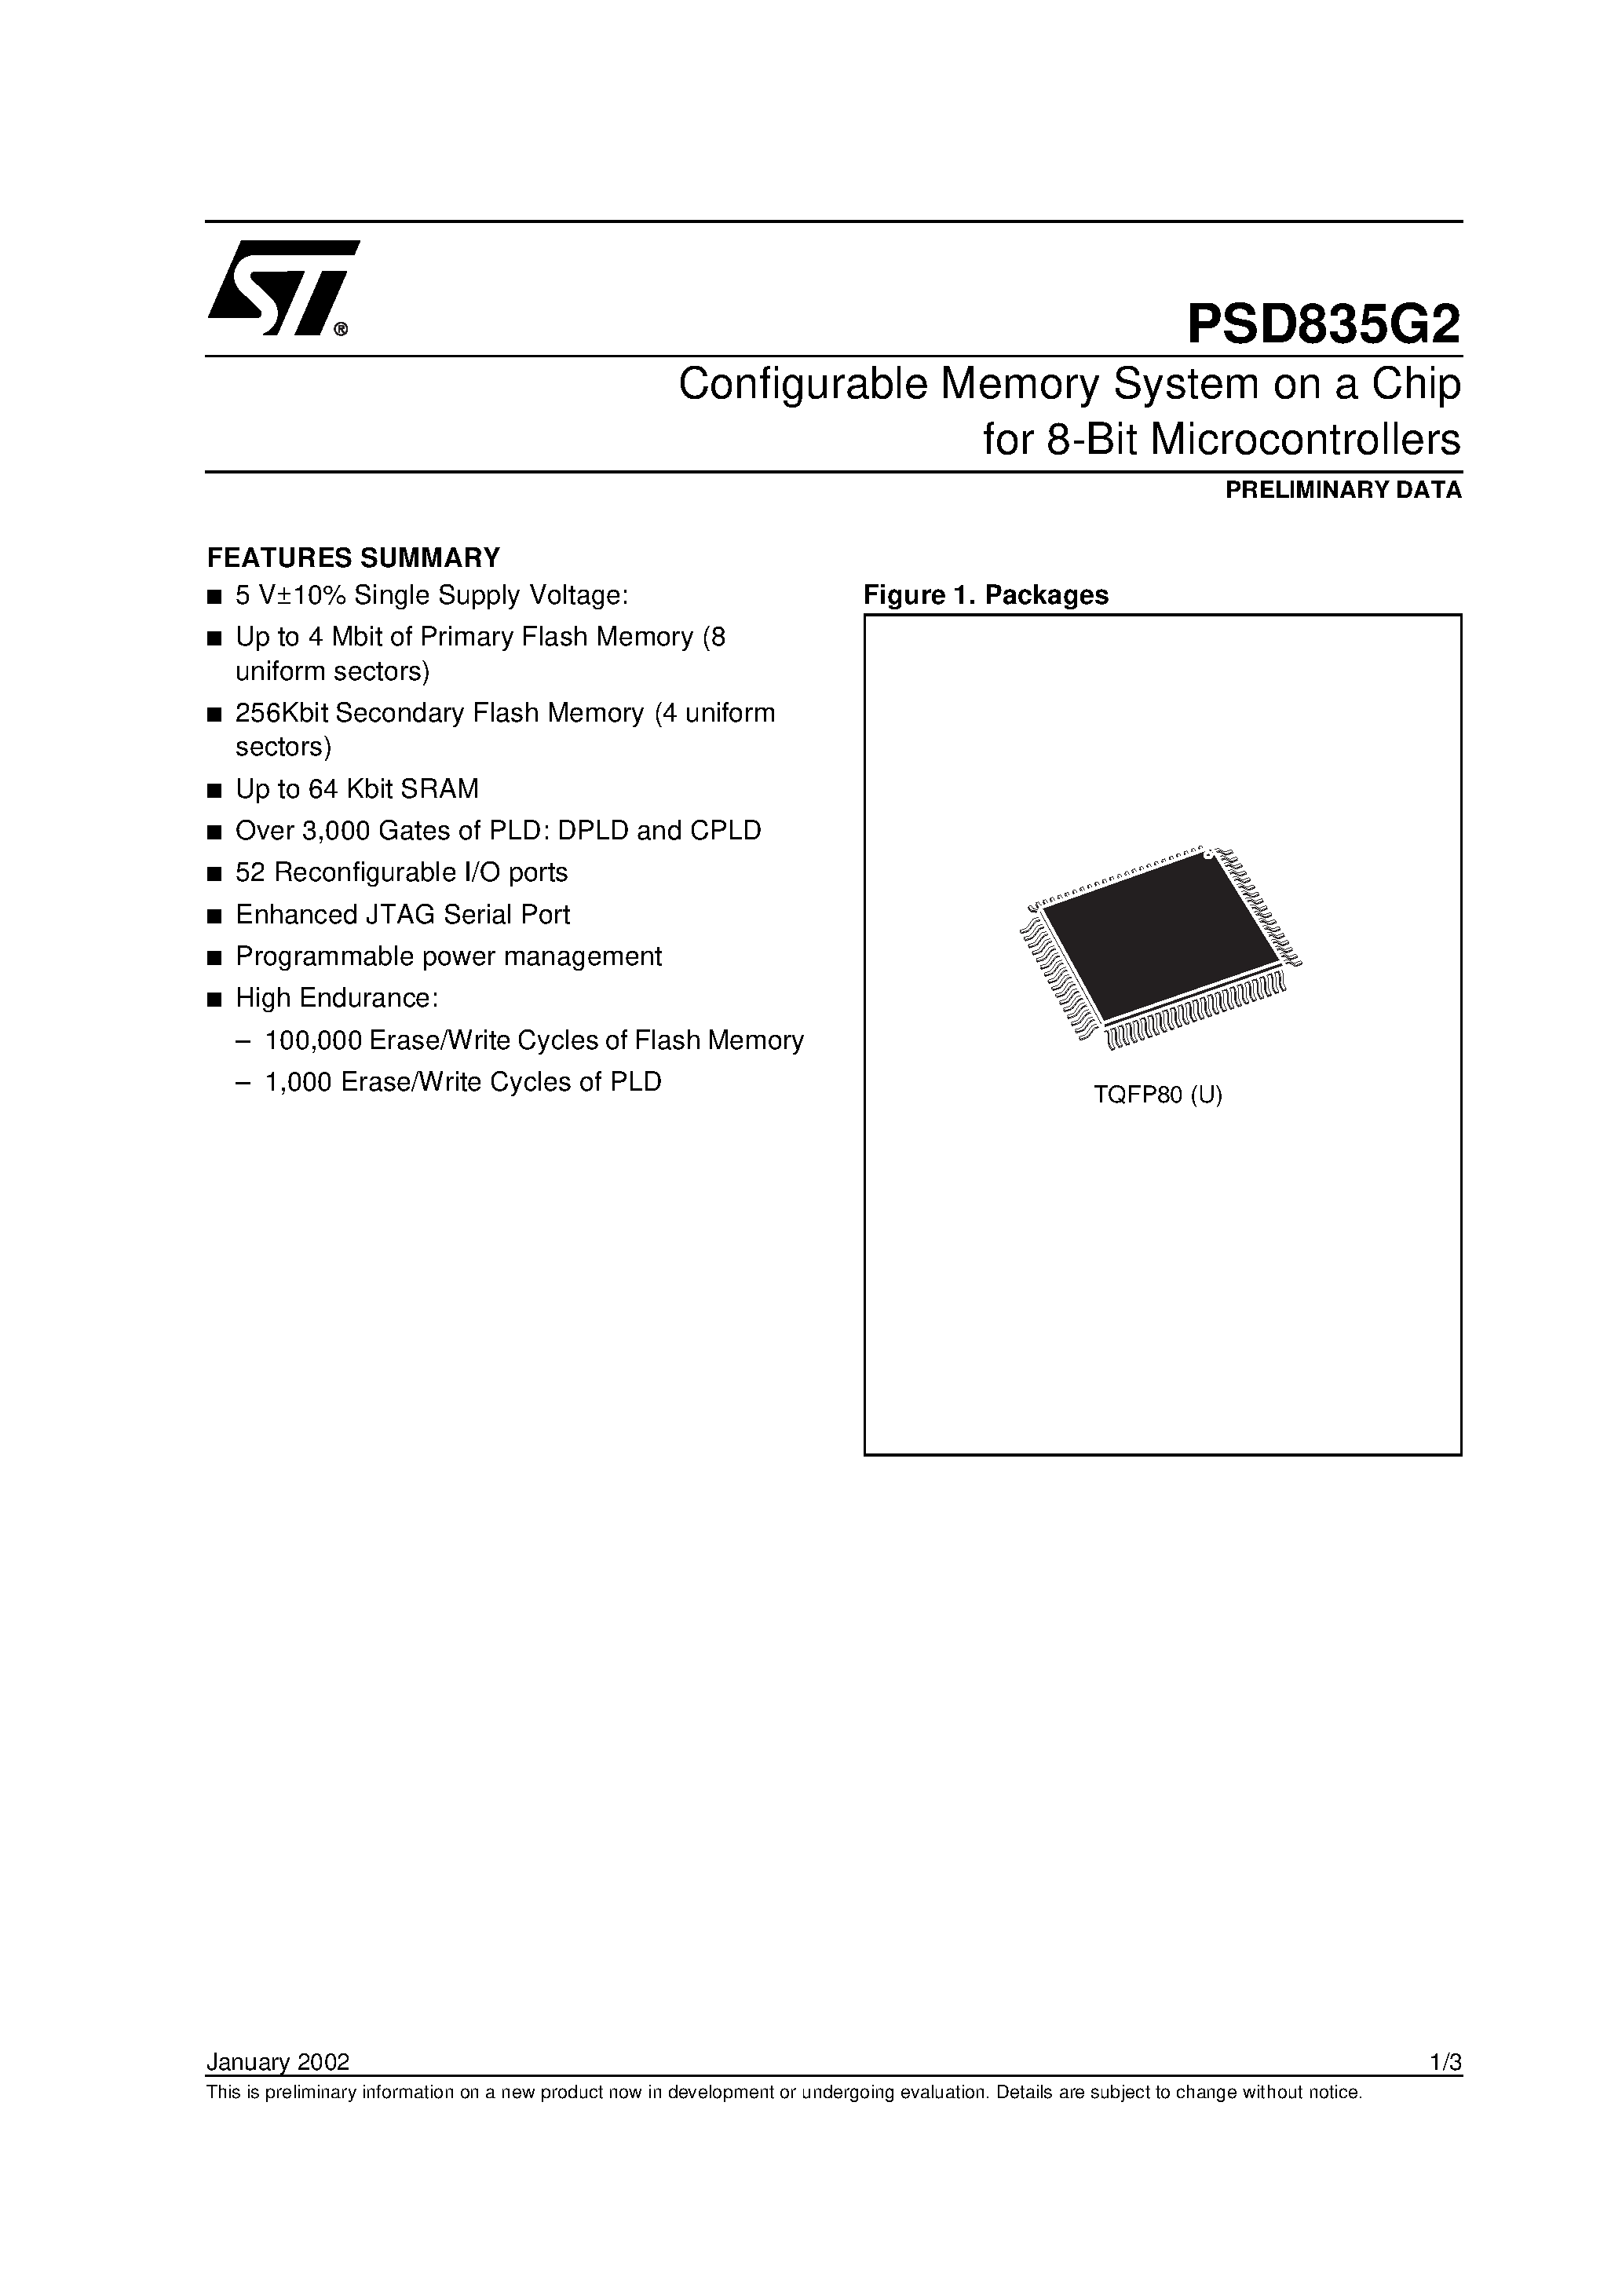 Datasheet PSD835F1-A-70J - Configurable Memory System on a Chip for 8-Bit Microcontrollers page 1